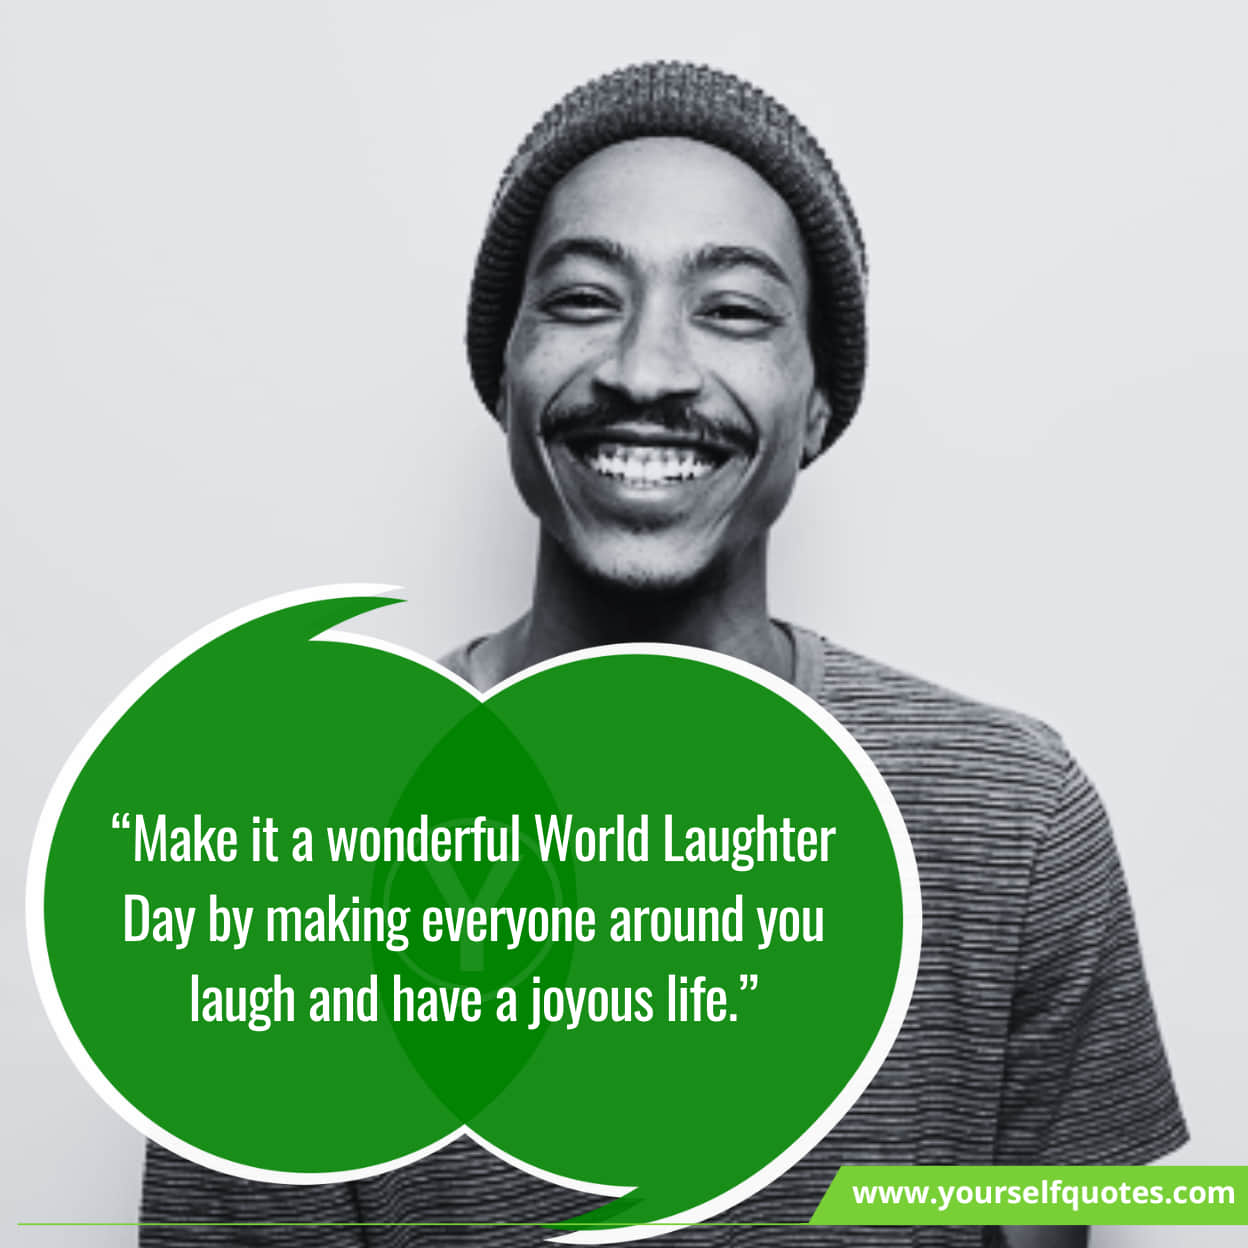 World Laughter Day Sayings & Greetings